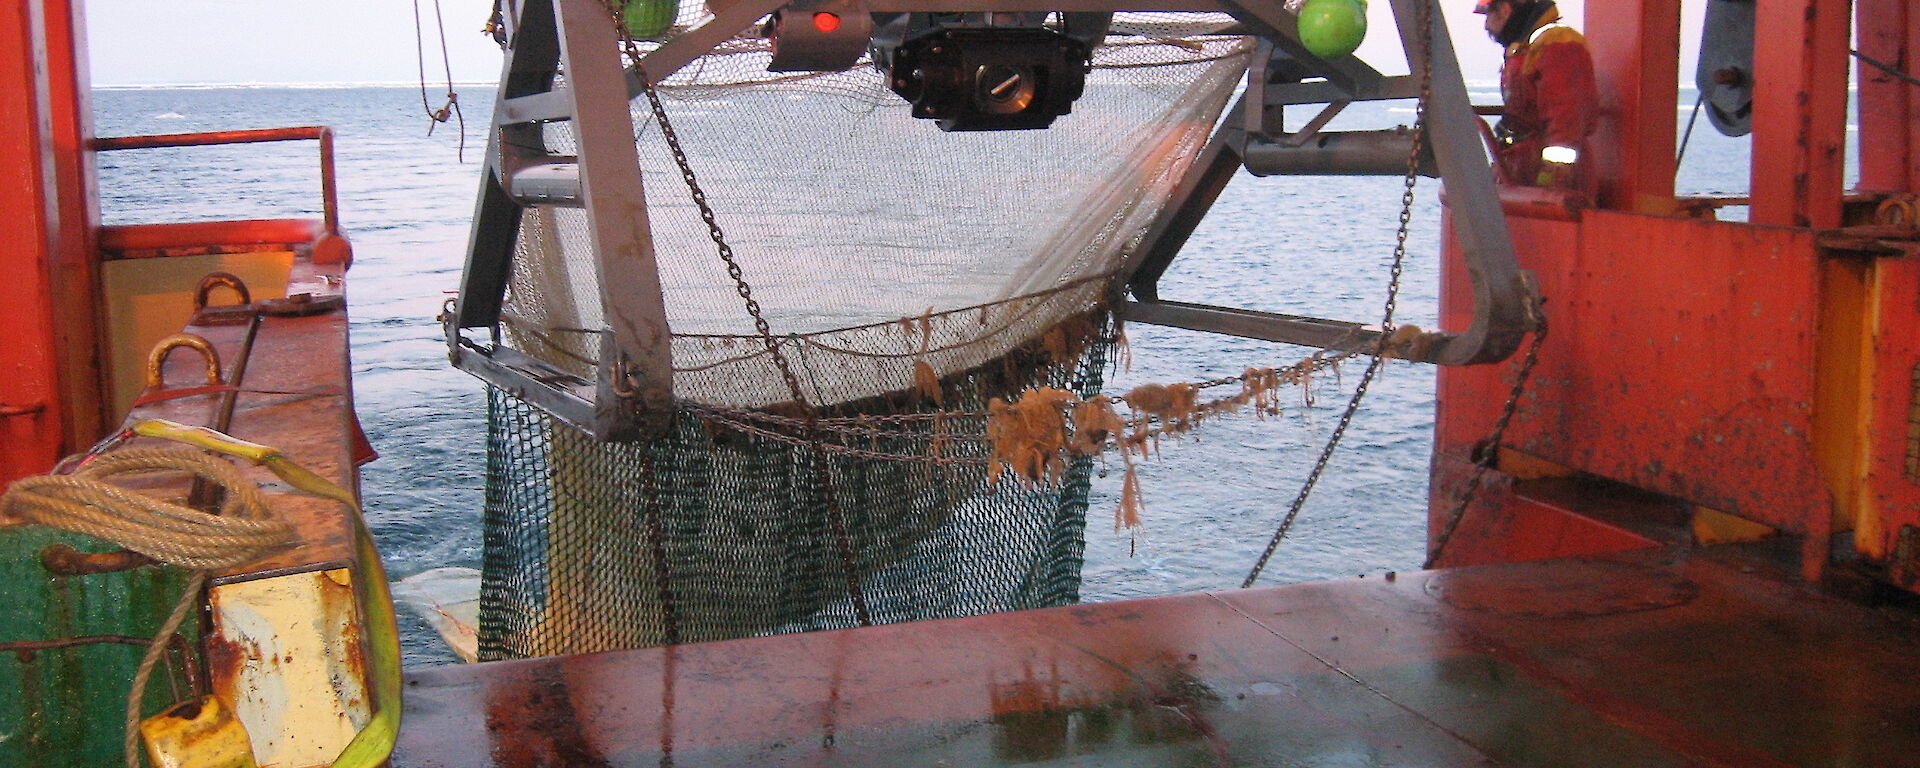 A beam trawl with a camera attached being deployed from the rear deck of the Aurora Australis.